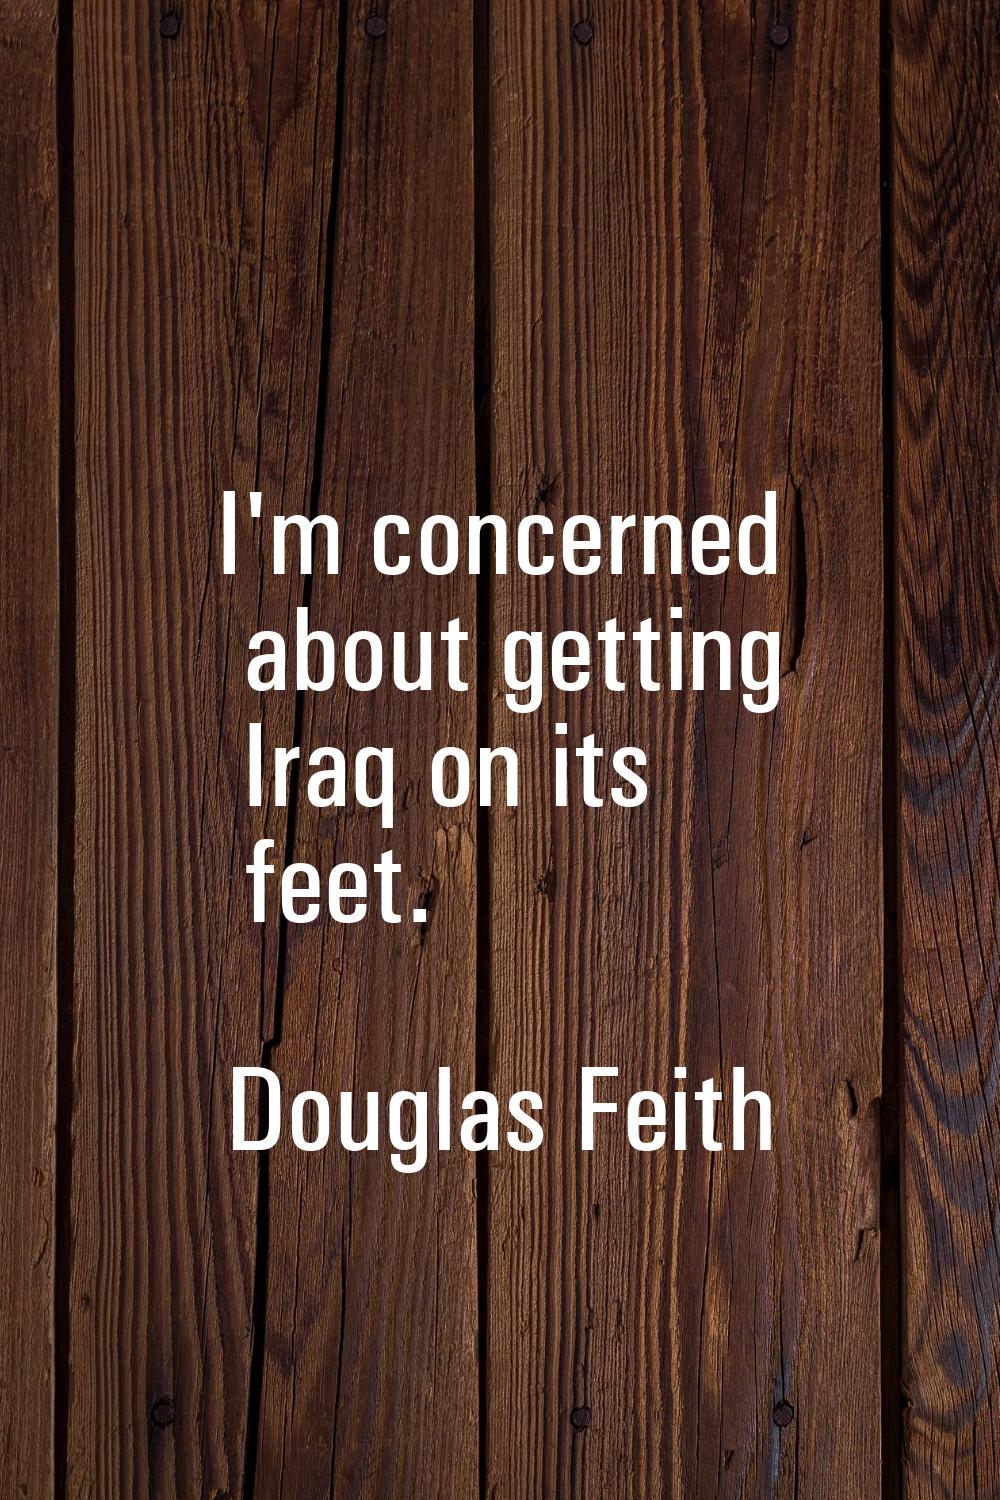 I'm concerned about getting Iraq on its feet.